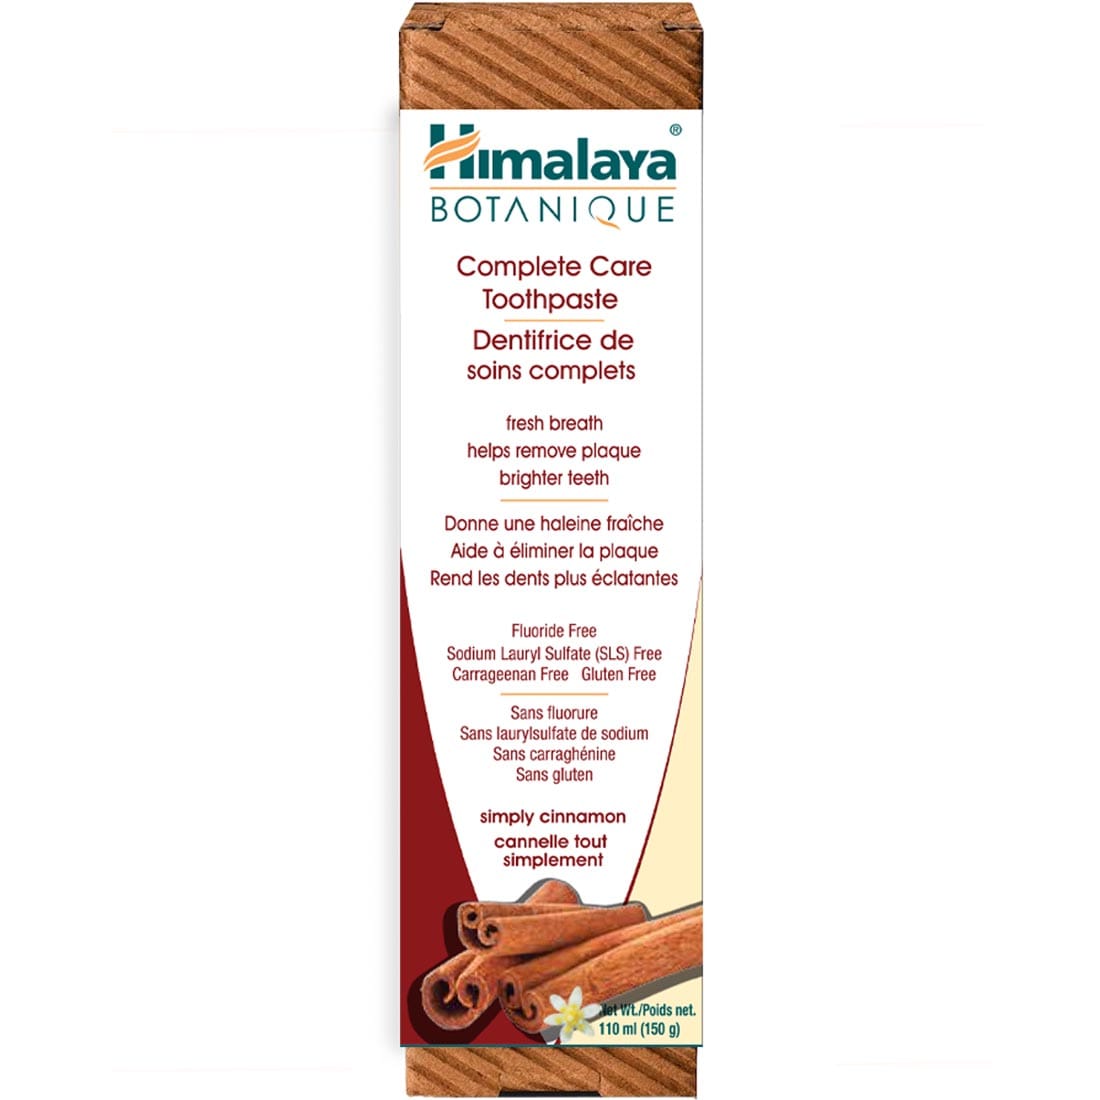 Himalaya Botanique Complete Care Toothpaste, 150g